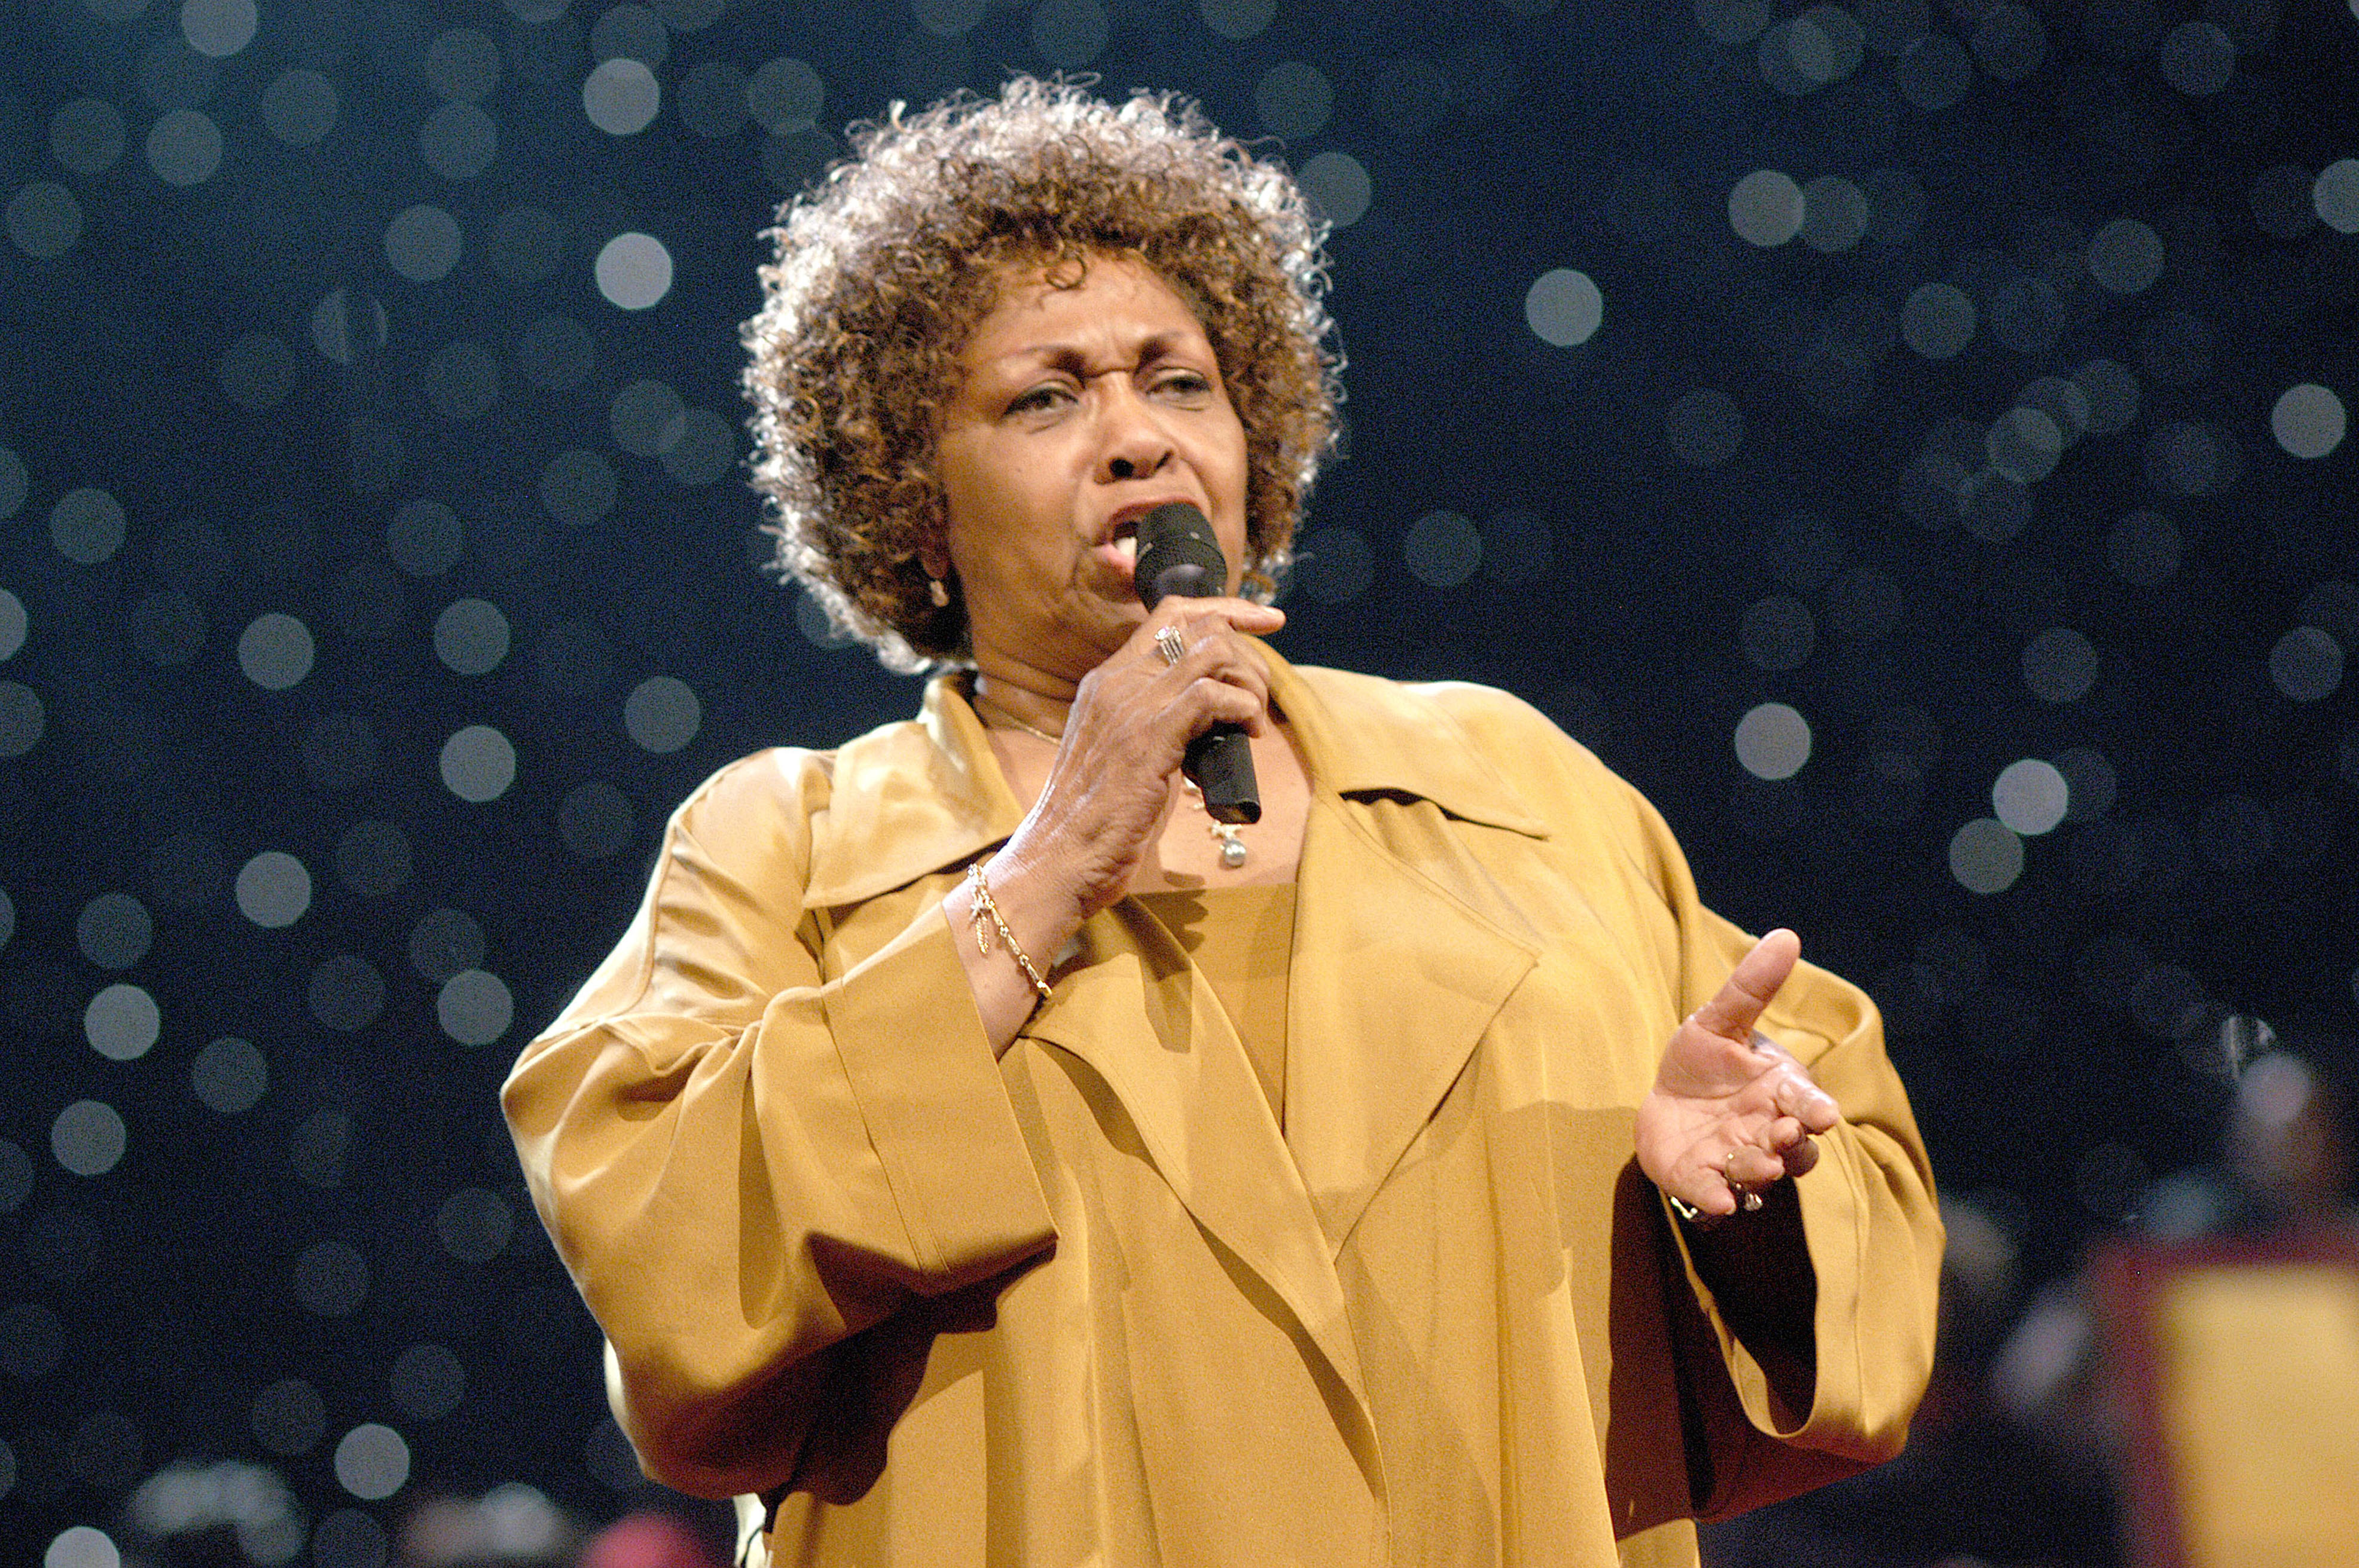 Cissy Houston performing in Dallas, Texas in 2003 | Source: Getty Images